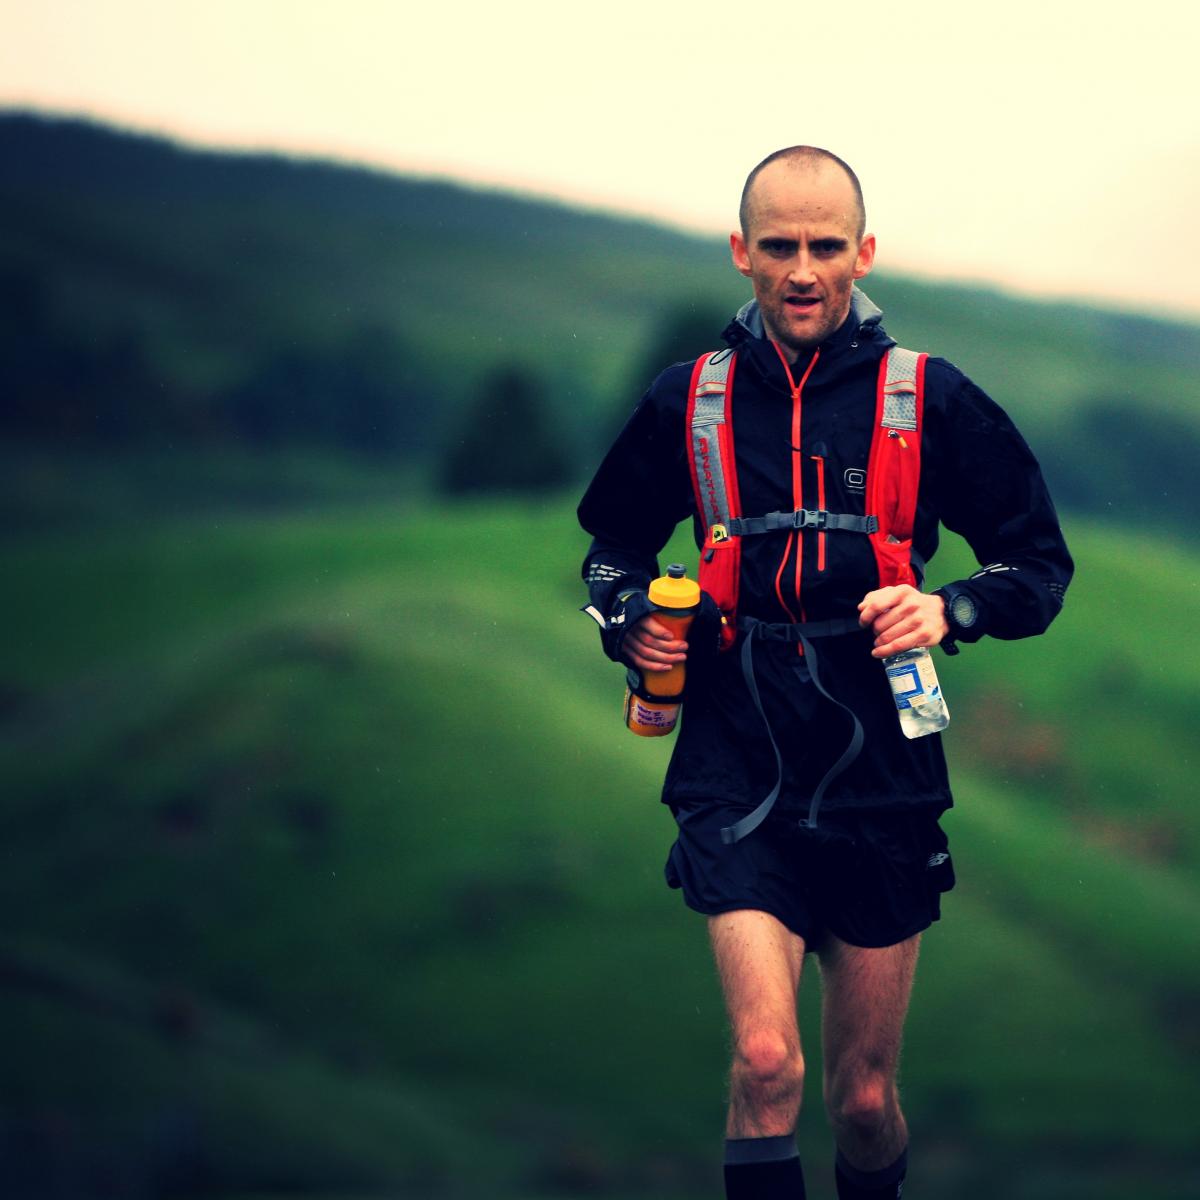 Paul Giblin leads the charge as ultra running gets up to speed